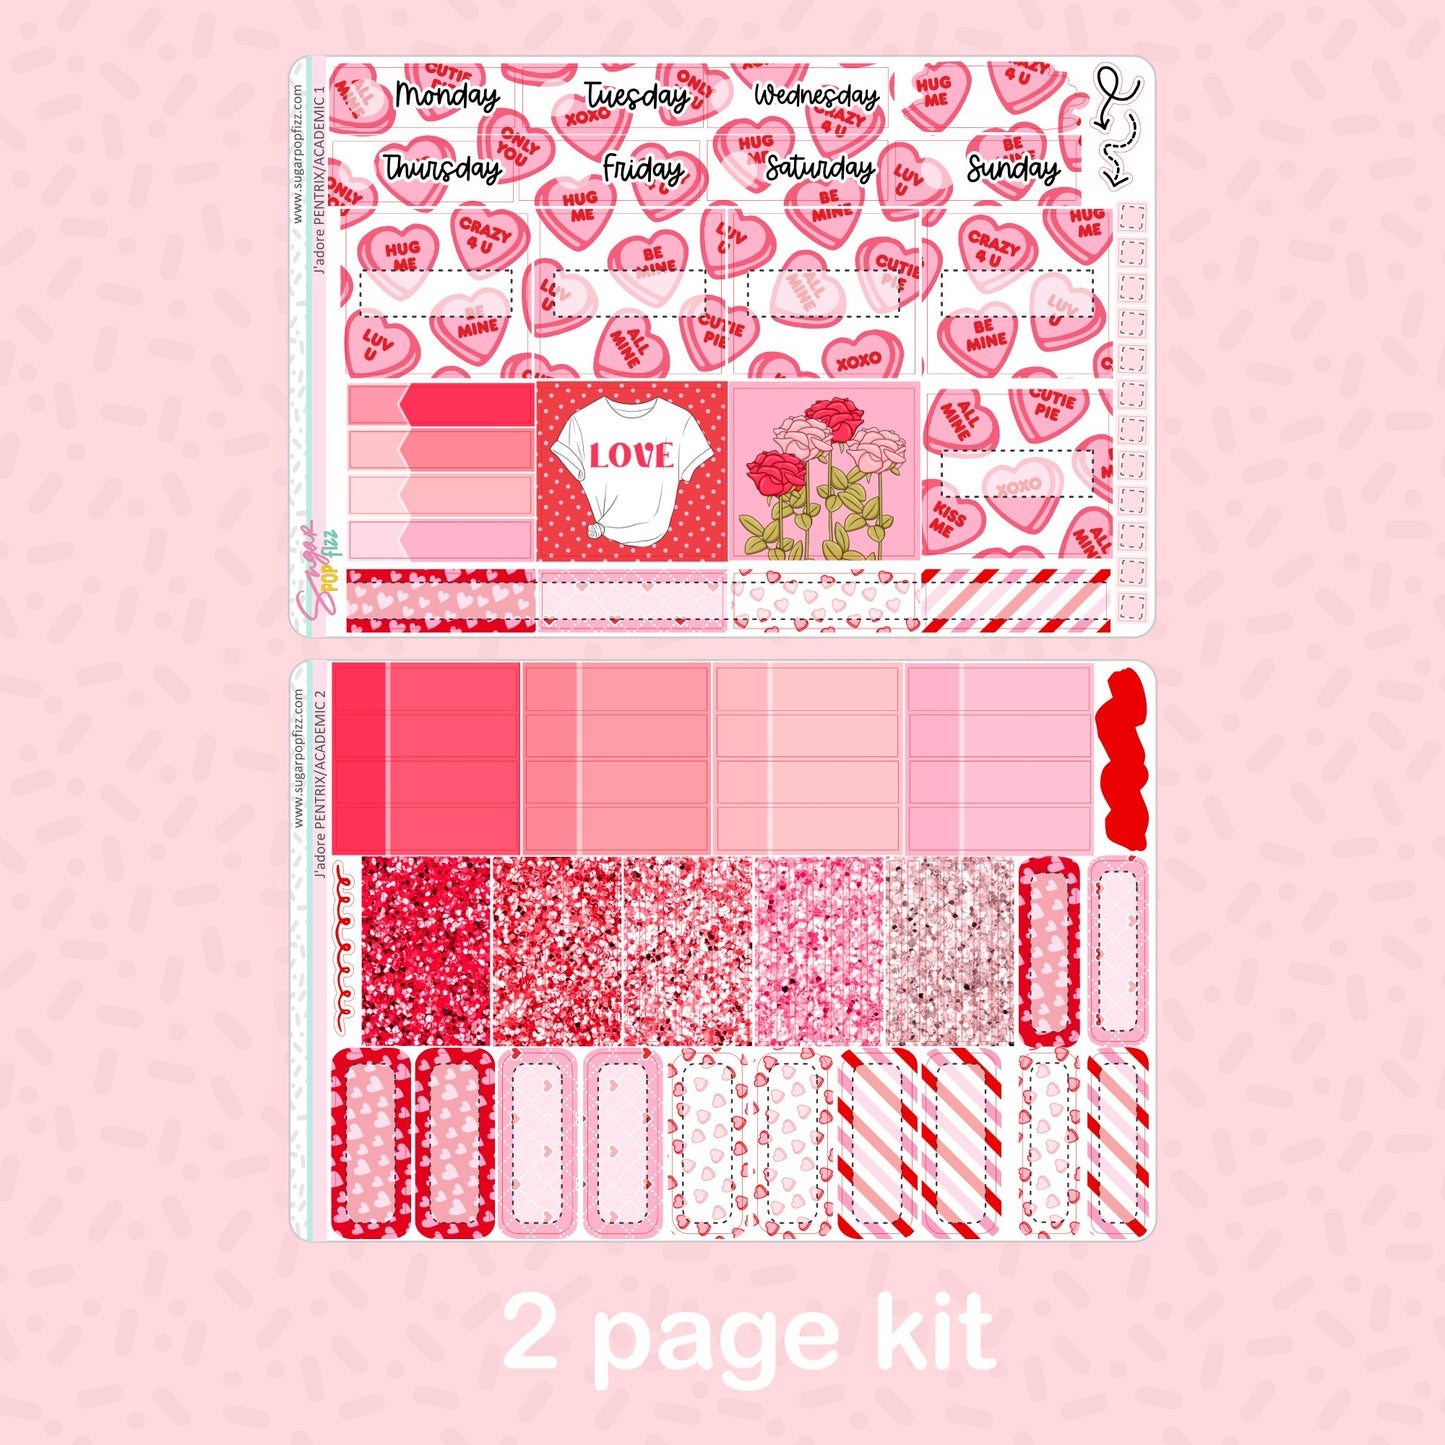 J'adore Penny Pages Pentrix Weekly Kit